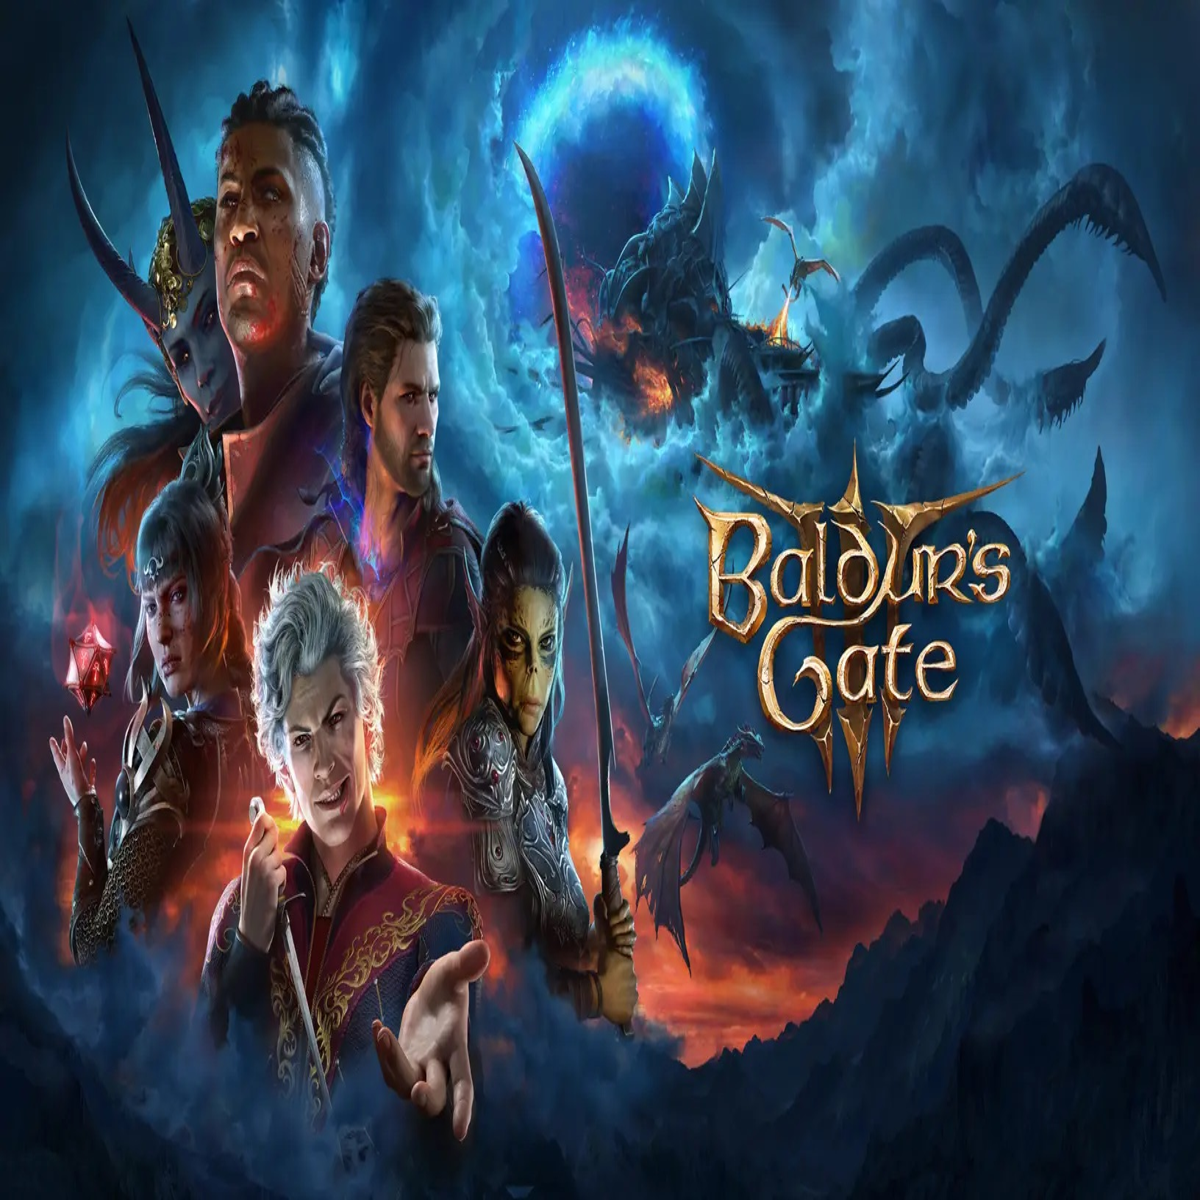 Baldur's Gate 3 launches to jaw-dropping success on Steam